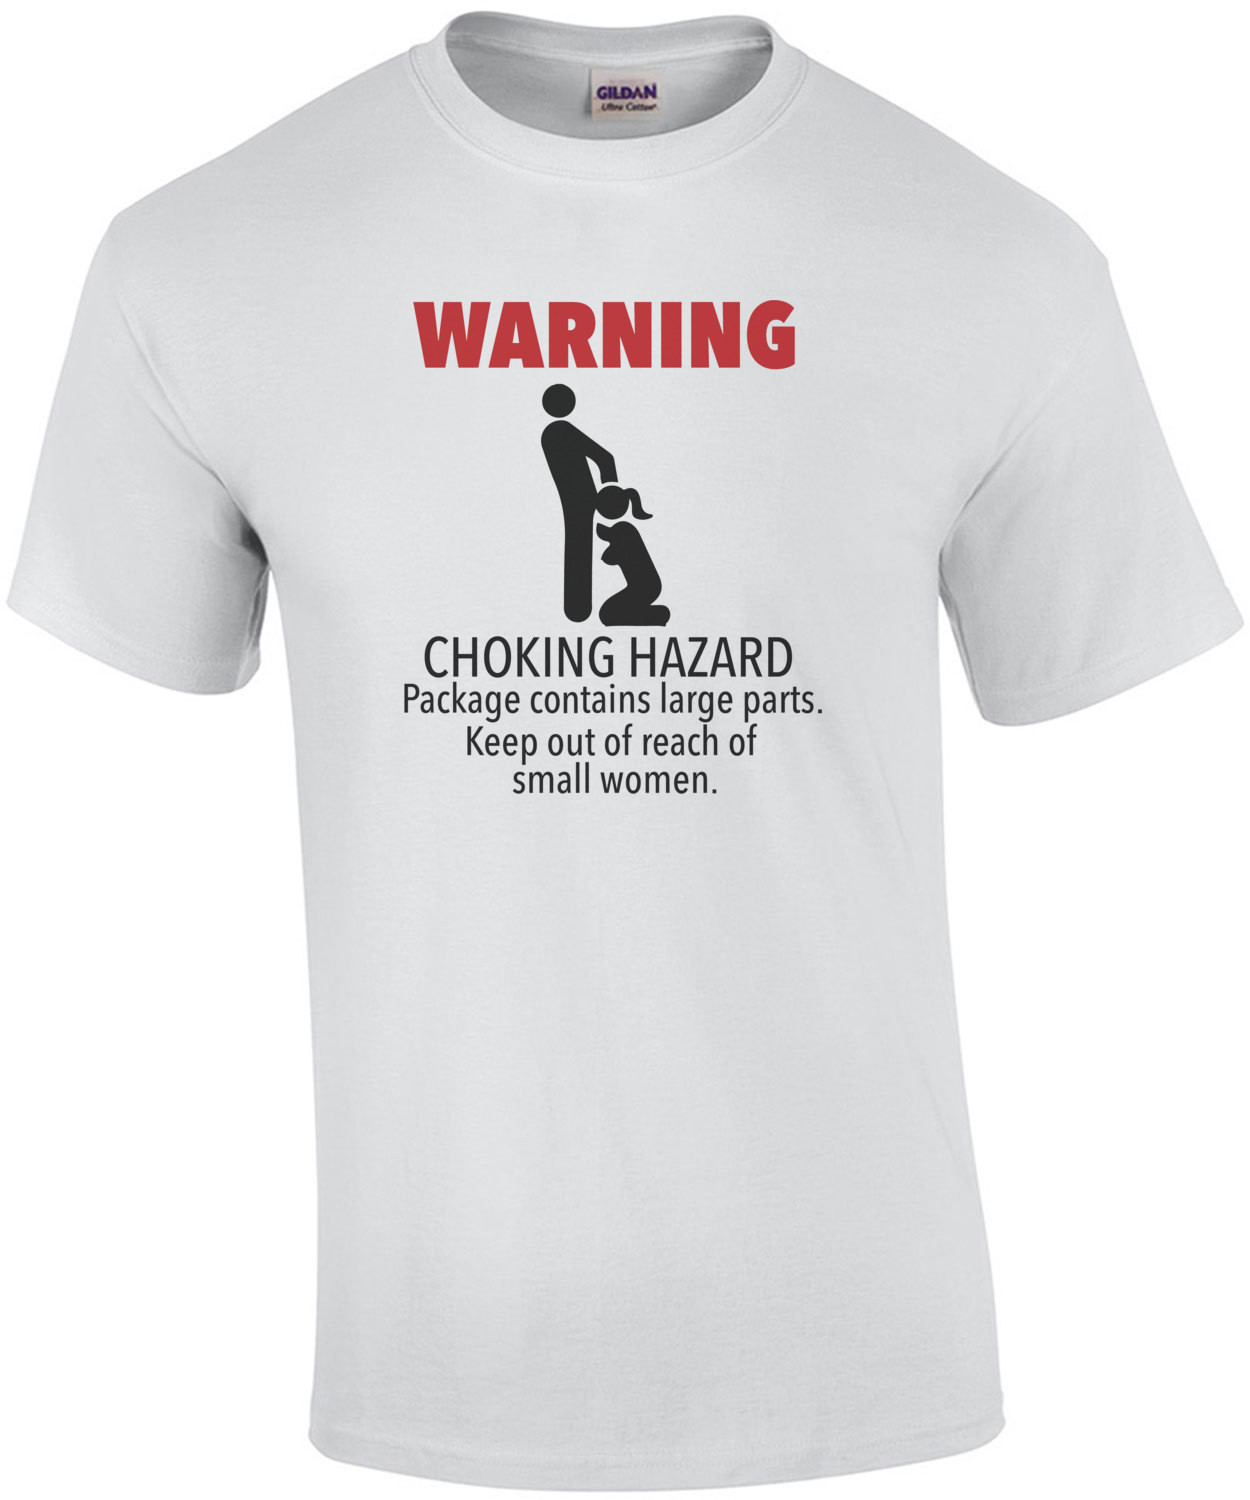 WARNING: Choking Hazard - package contains large parts. Keep out of reach of small women. Blowjob T-Shirt